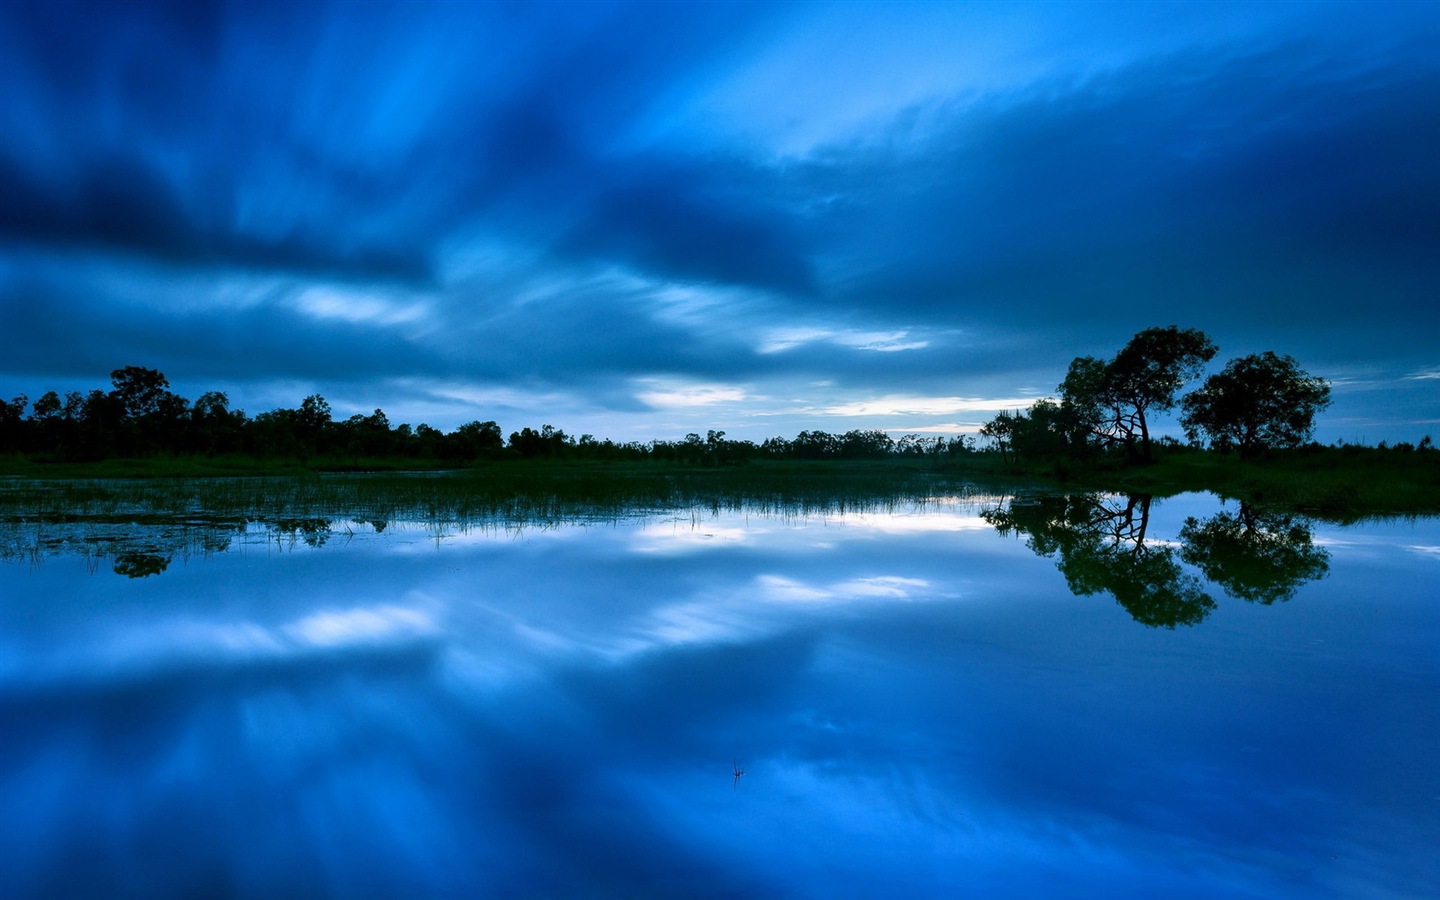 Reflection in the water natural scenery wallpaper #9 - 1440x900